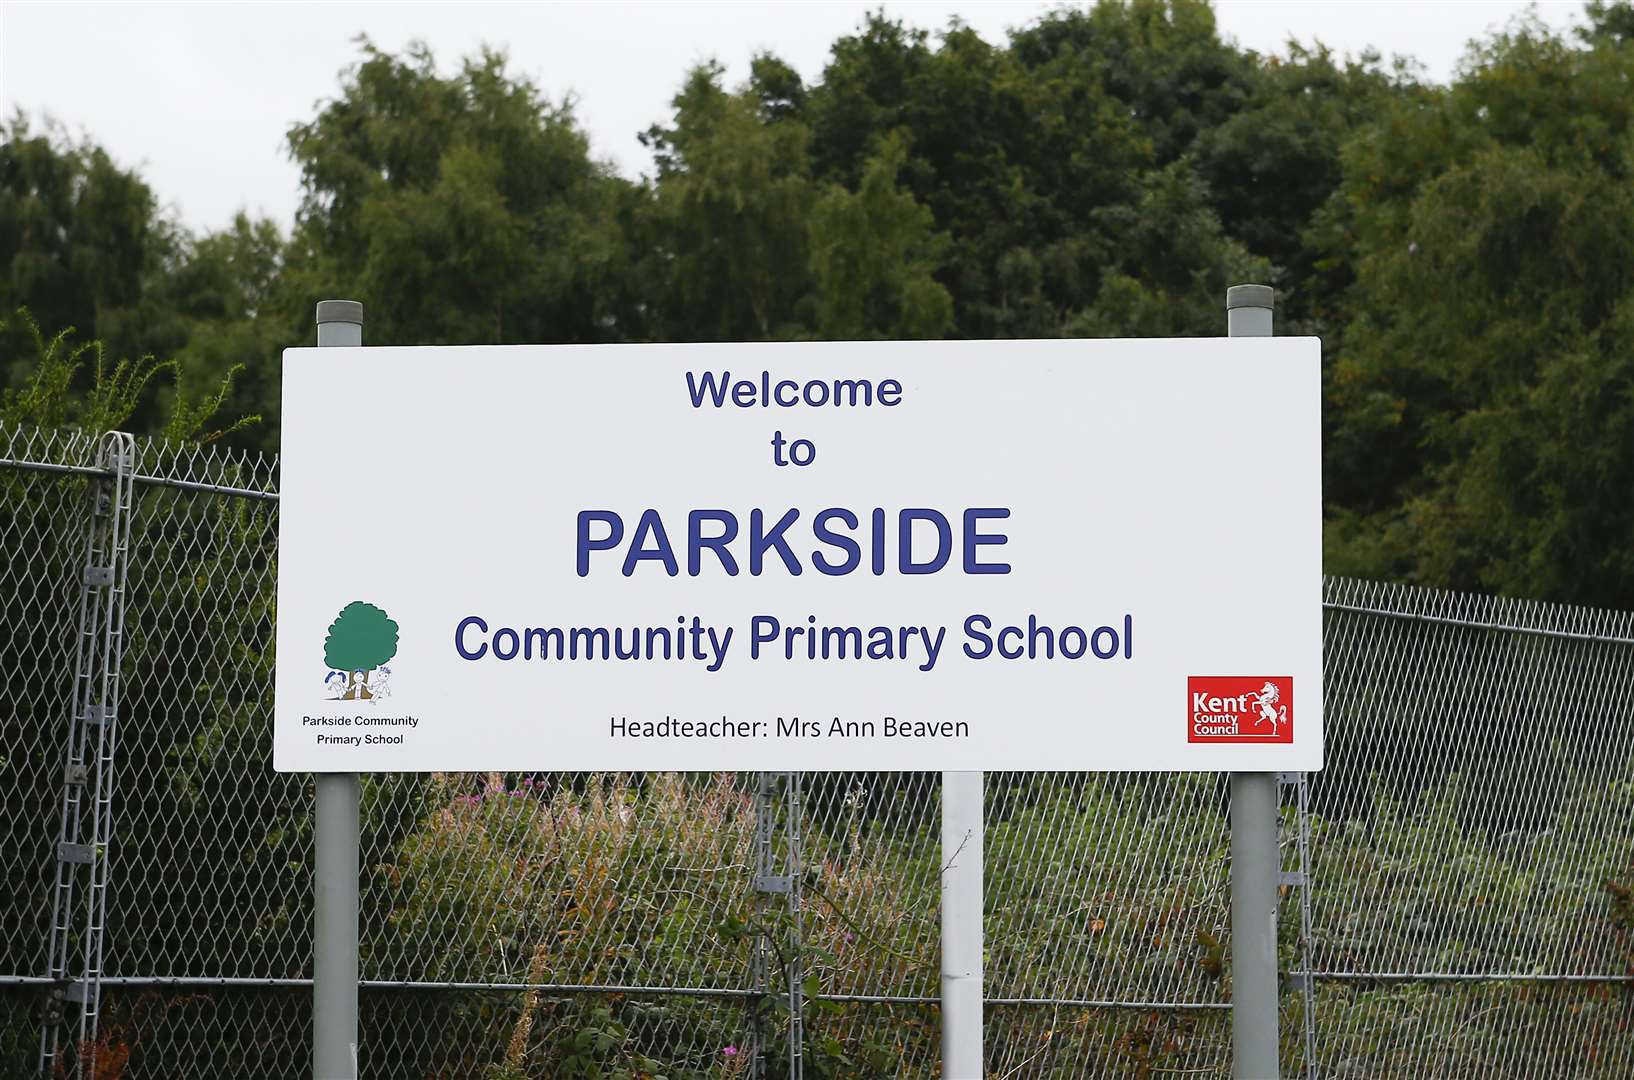 Head teacher James Williams says the improvements noted show Parkside has a bright future